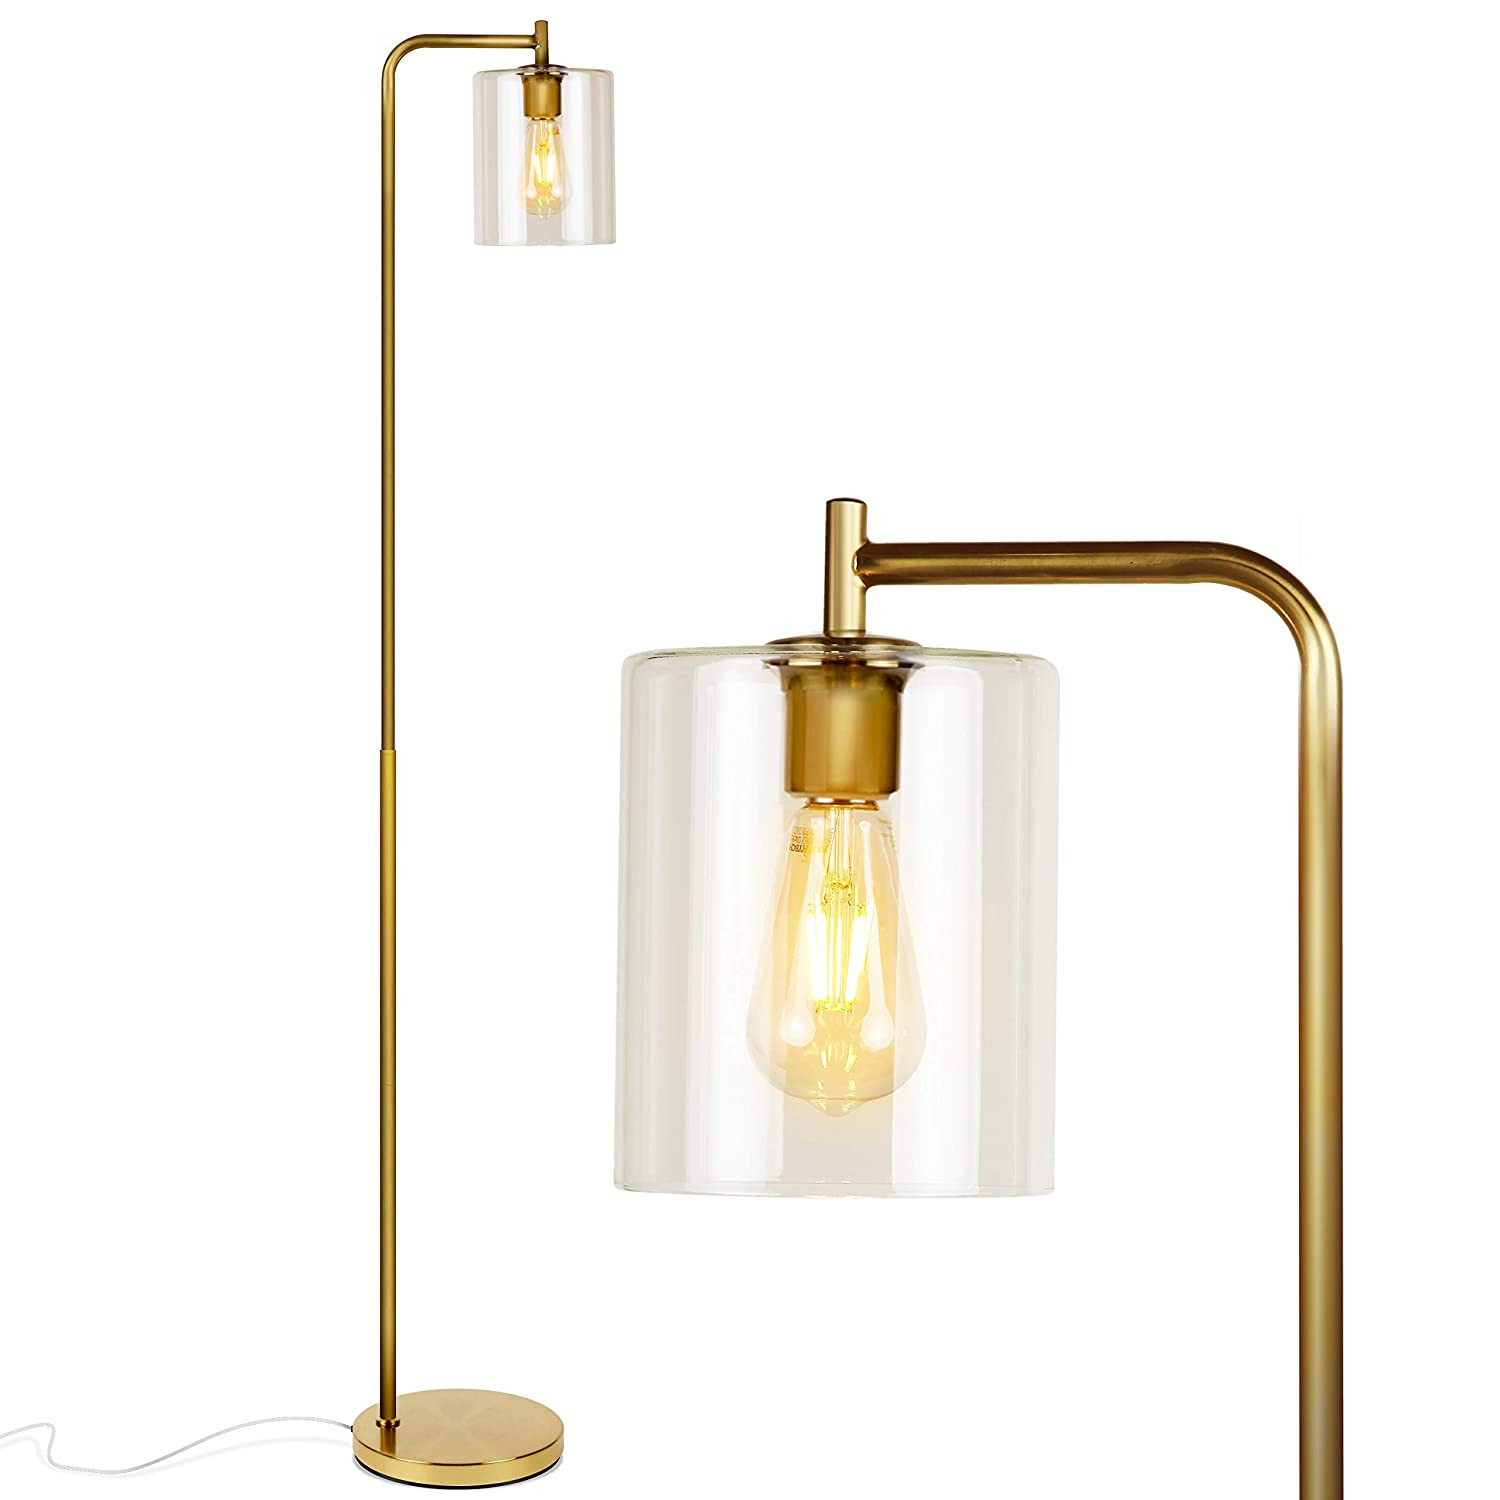 Pole Lamps For Living Room
 Best pole lamps for living room brass Your House